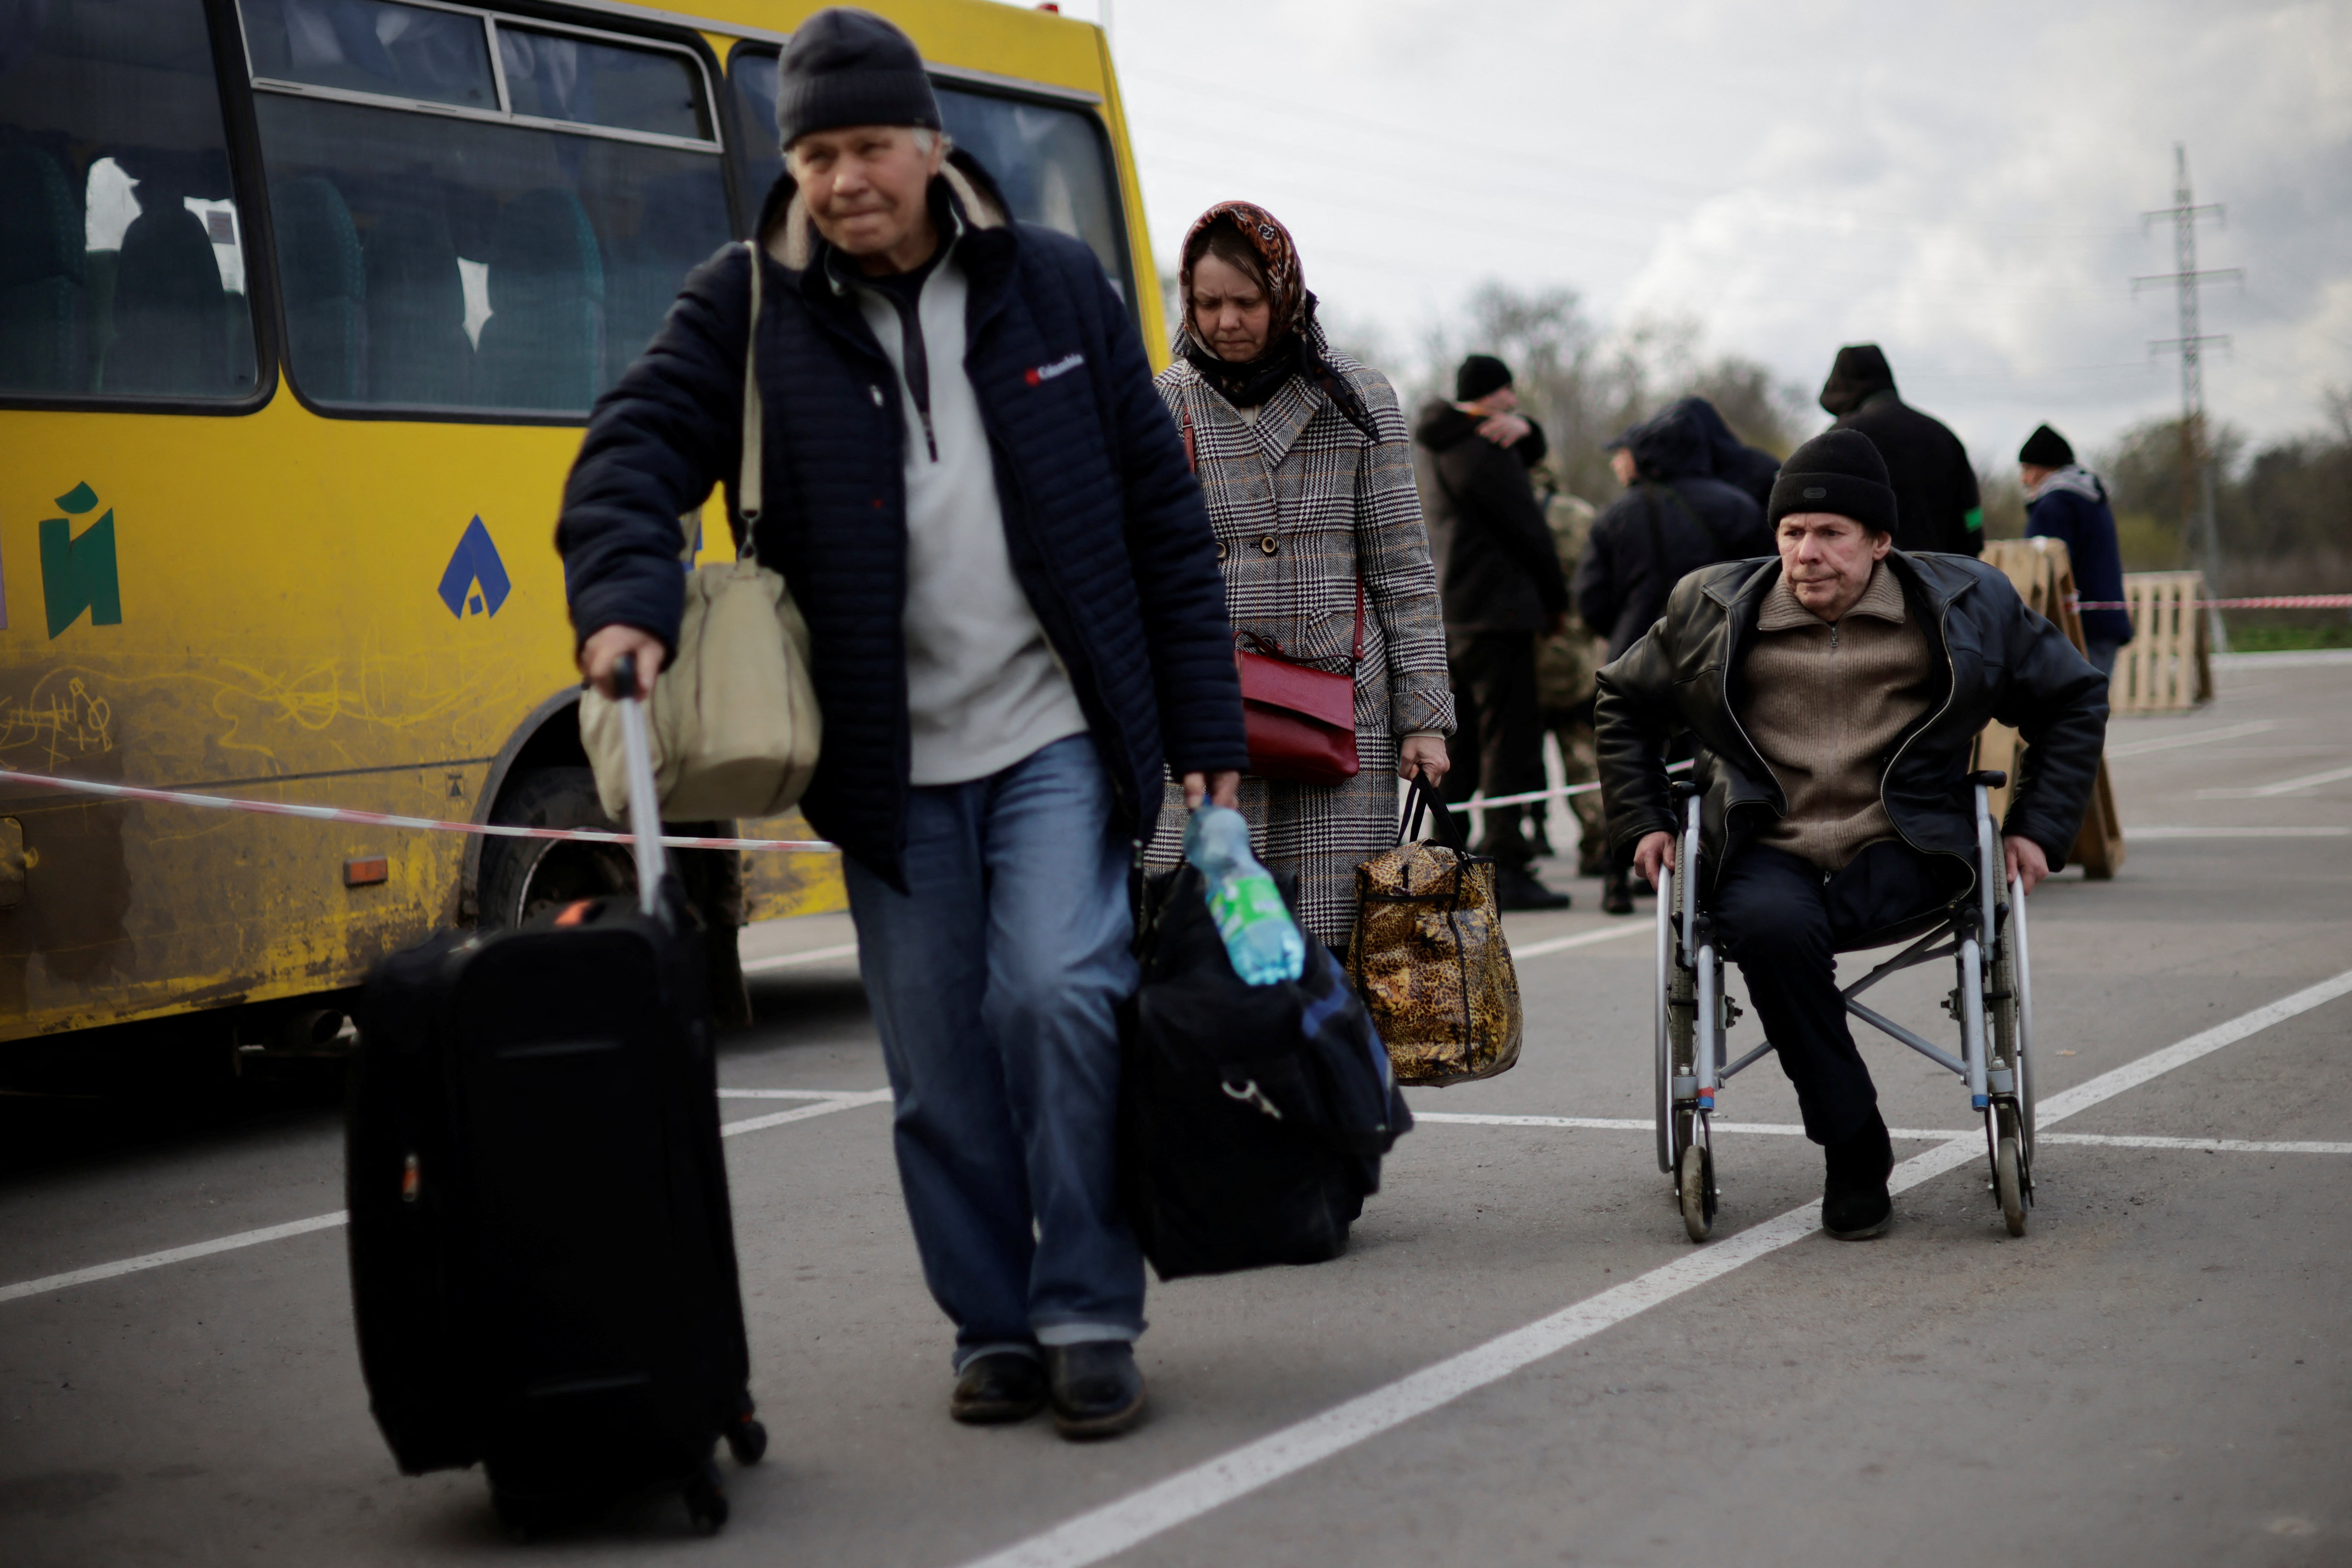 Ukrainian refugees in Zaporizhzhia, Ukraine, walk towards a registration center for internally displaced people April 21, 2022, after arriving in a small convoy that crossed through a territory held by Russian forces. (CNS photo/Ueslei Marcelino, Reuters)